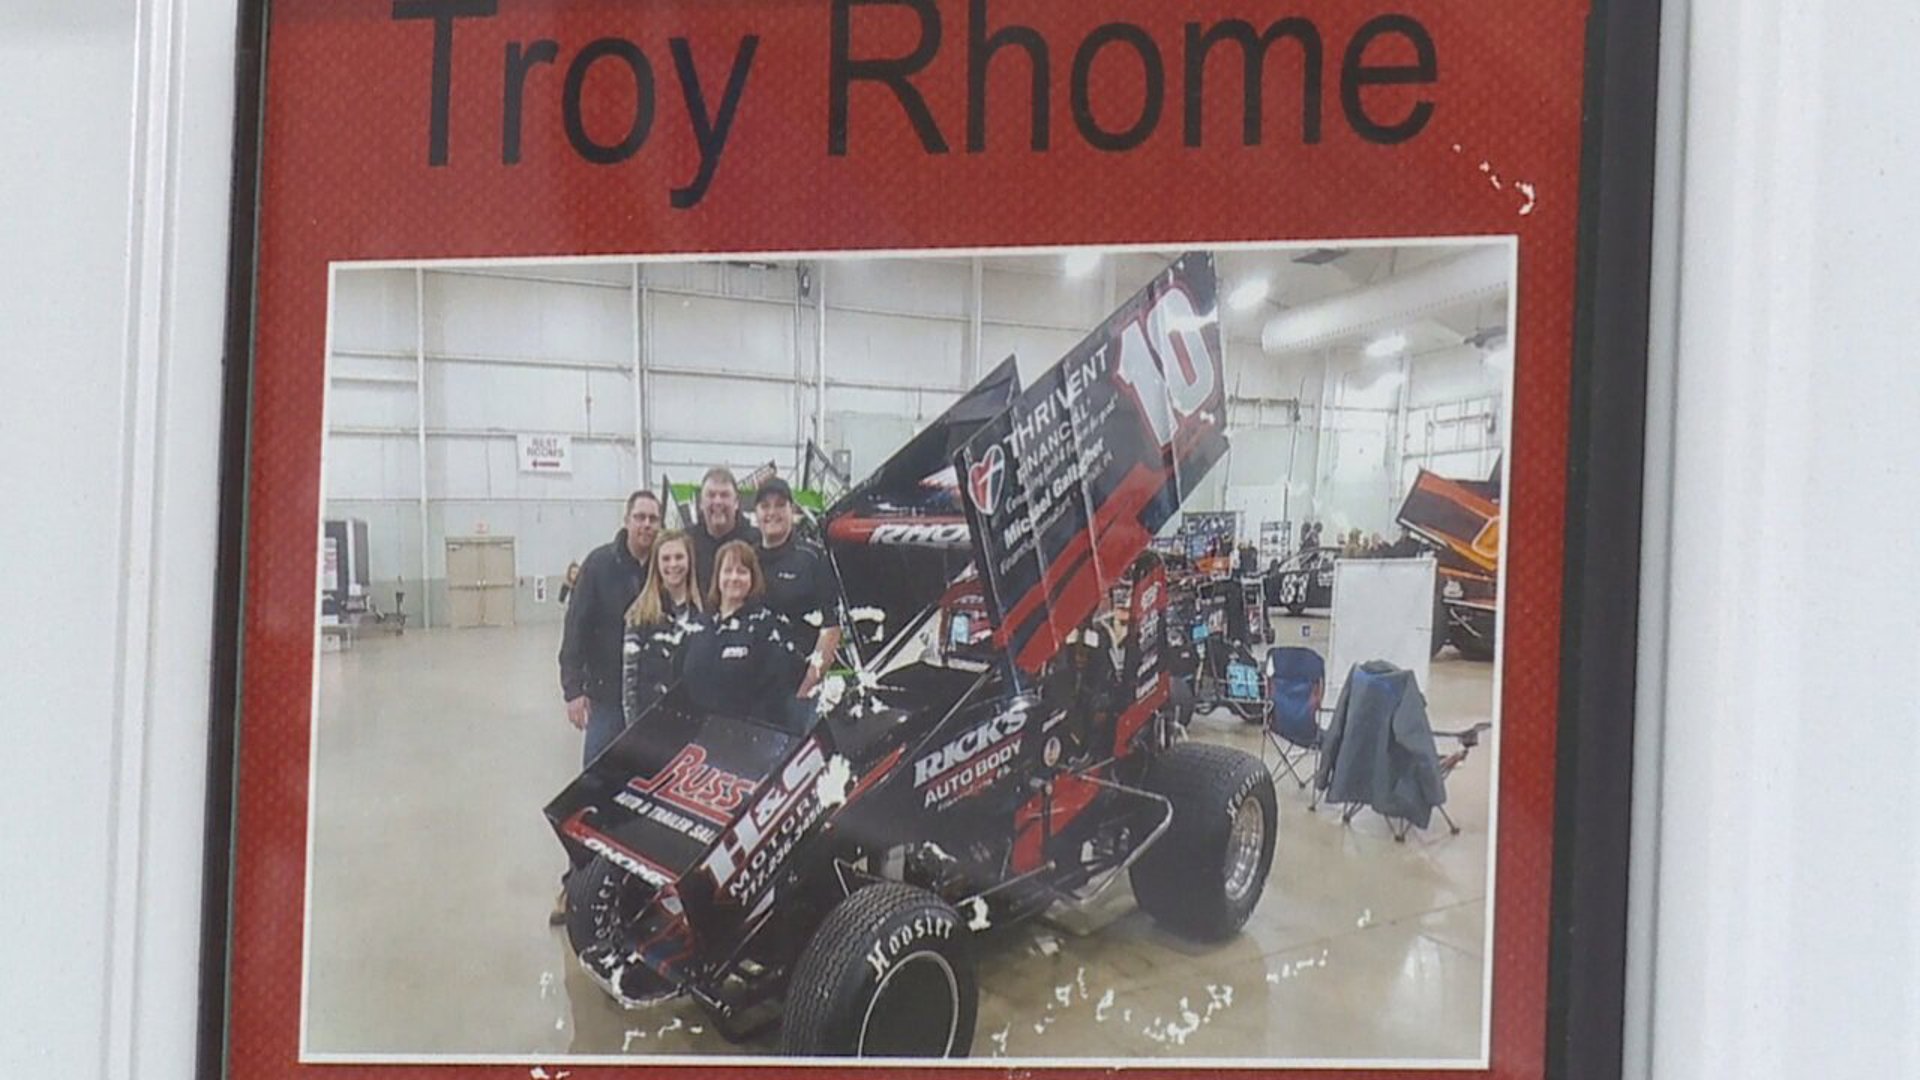 Rhome Family Motorsports takes the family business to another level. It's an all-in racing operation that has created traditions and memories over 20 years.